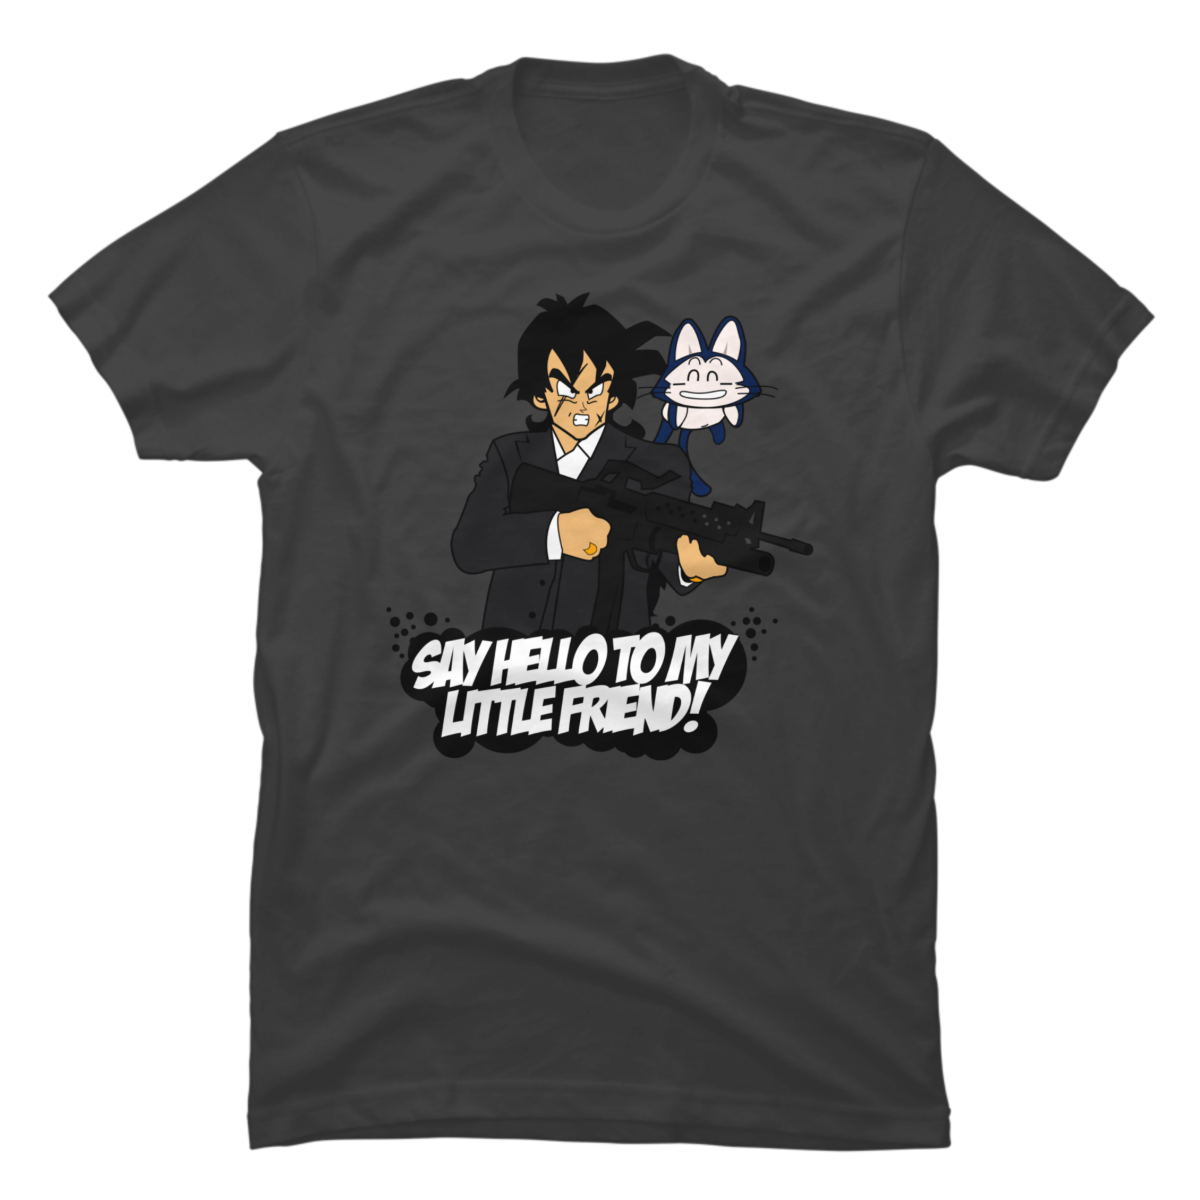 say hello to my little friend shirt